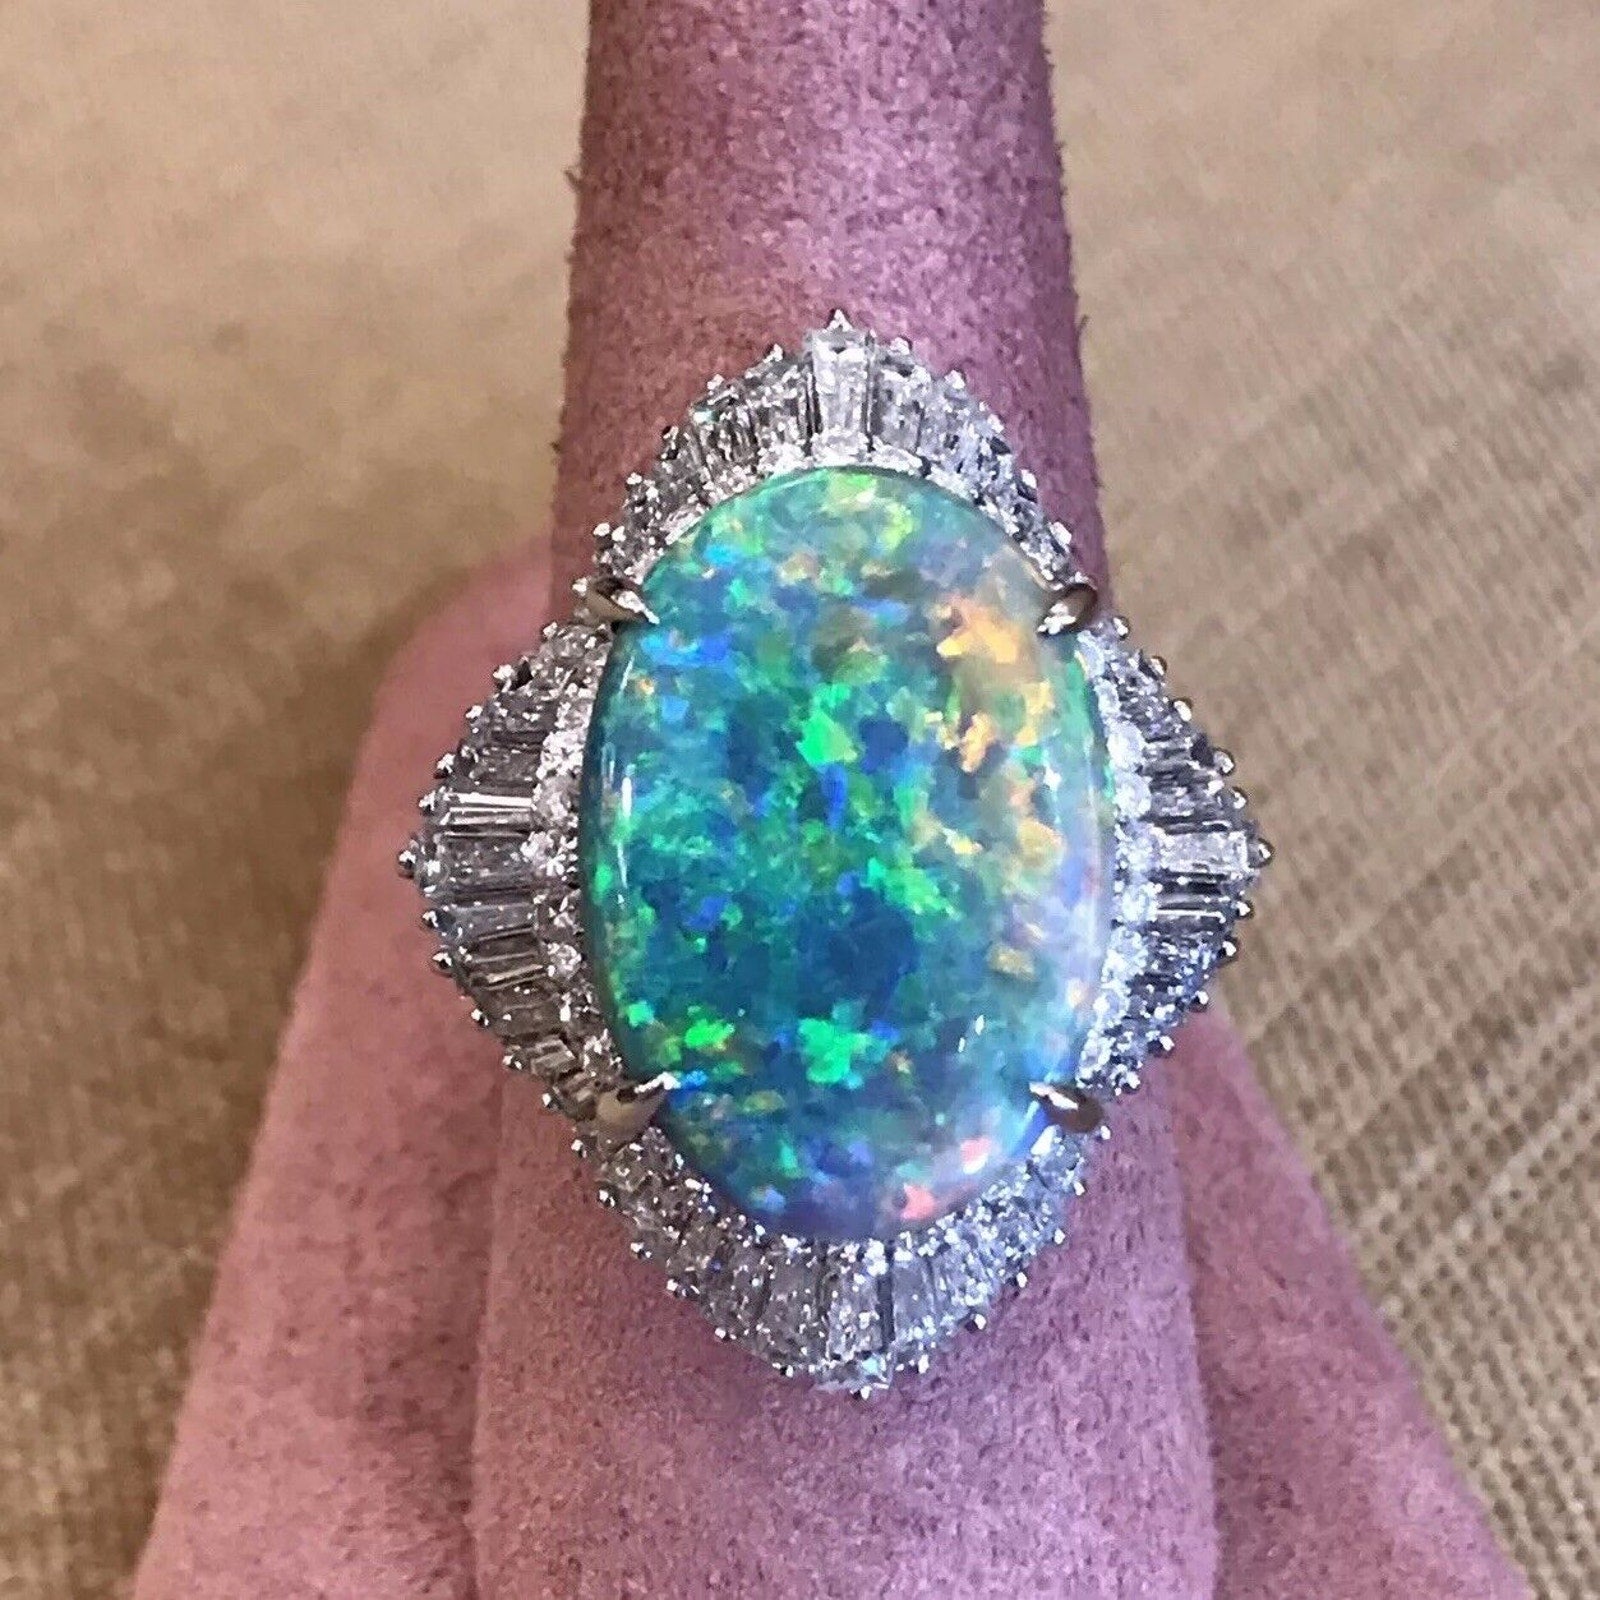 7.71 carat Certified Black Opal and Diamond Ring in Platinum